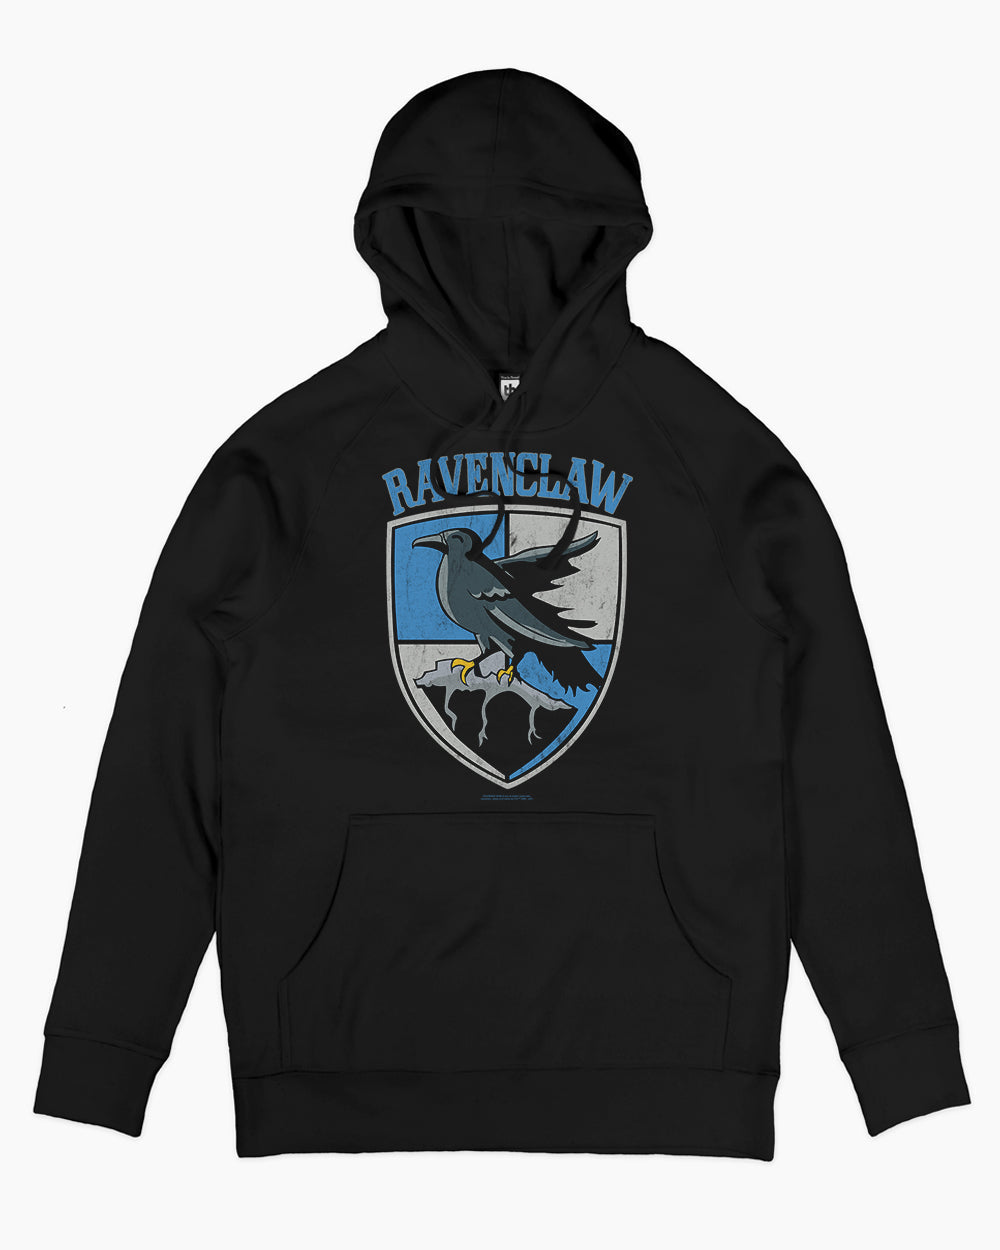 Official | | Threadheads Merch Hoodie Harry Ravenclaw Crest Potter